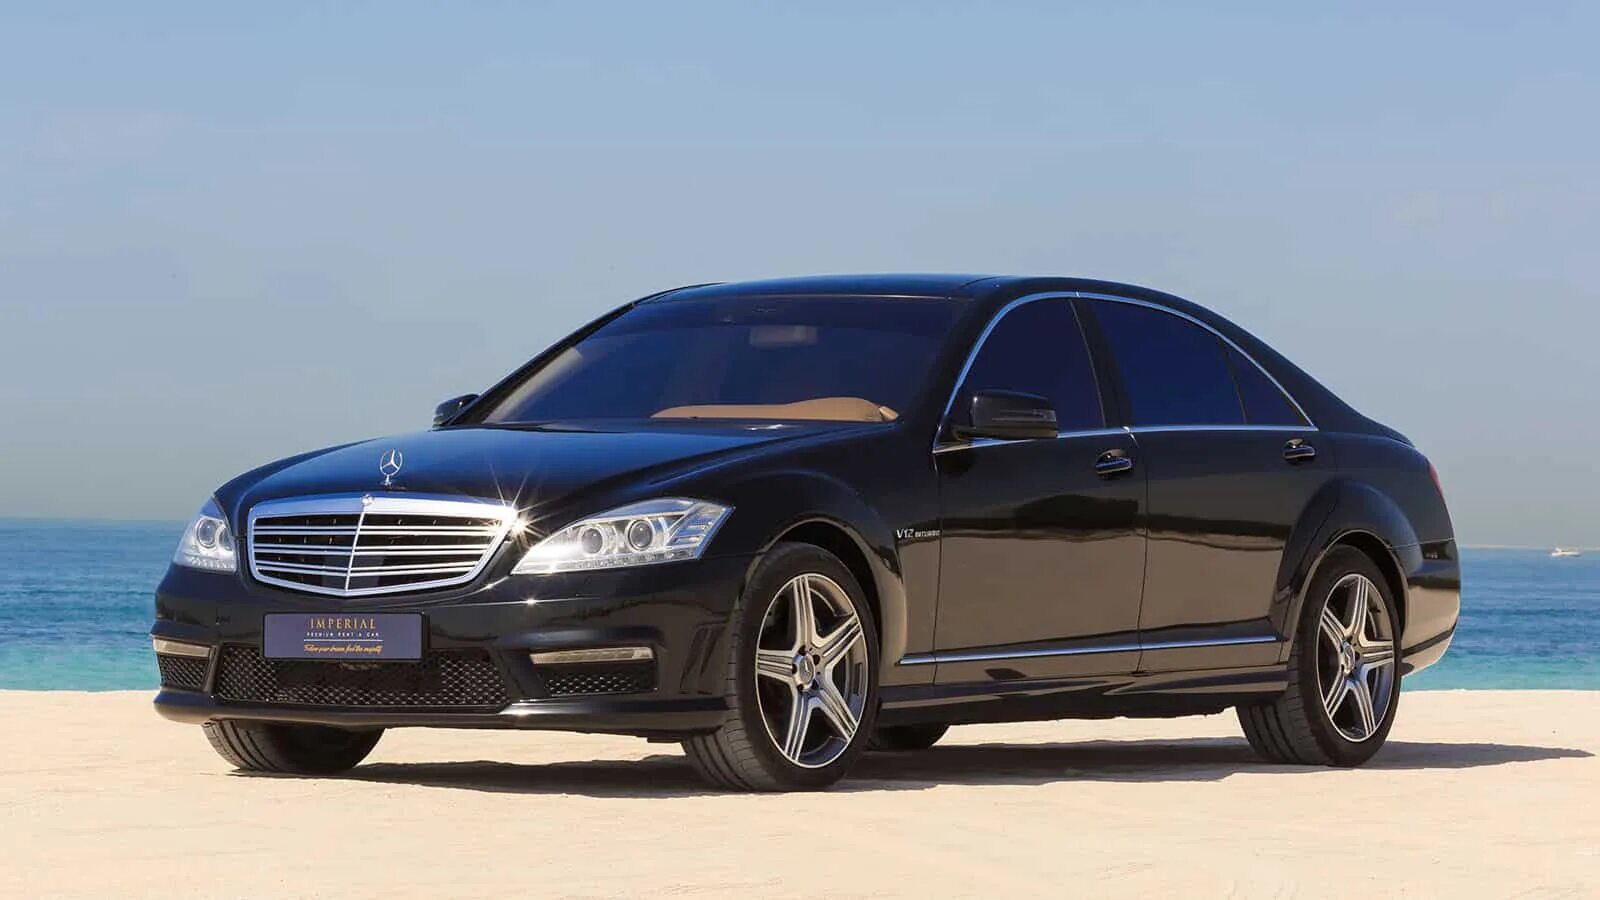 Mercedes Benz s 65 AMG. Мерседес s65 AMG 2007. Mercedes-AMG S 65 L. Мерседес е65 АМГ. Купить s 65